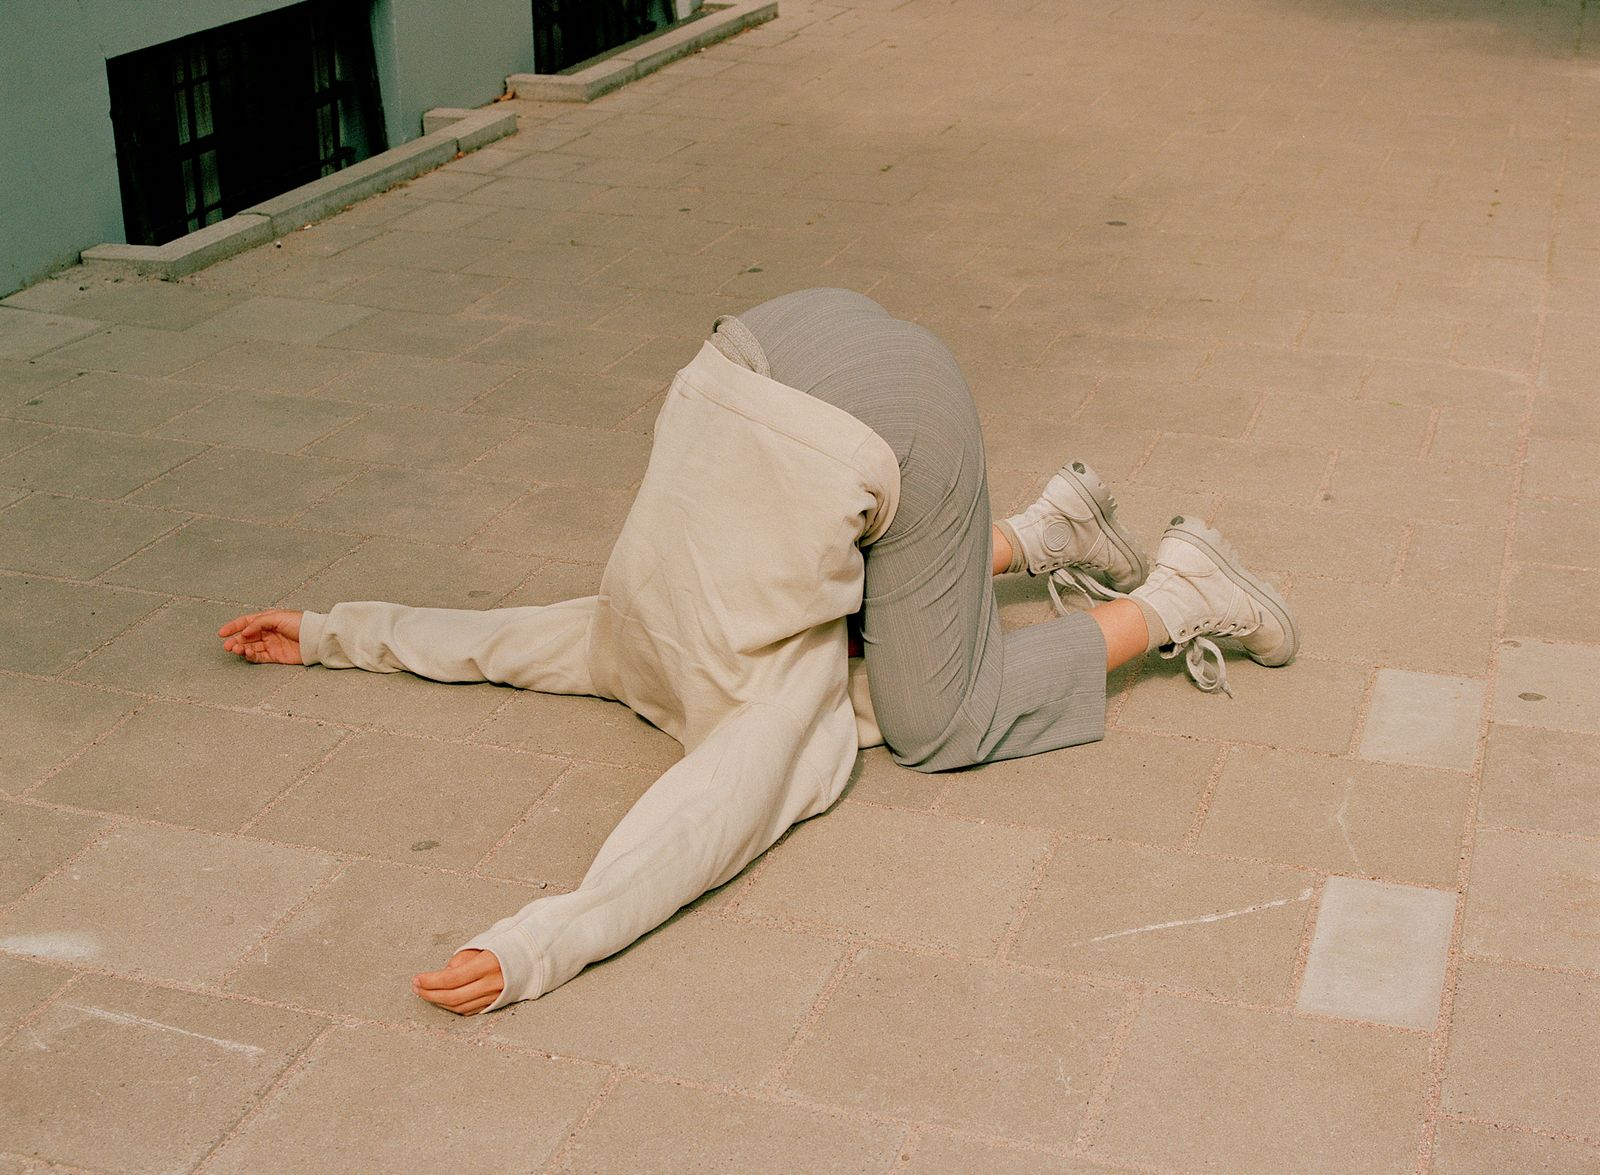 © Melissa Schriek - Image from the The city is a choreography photography project